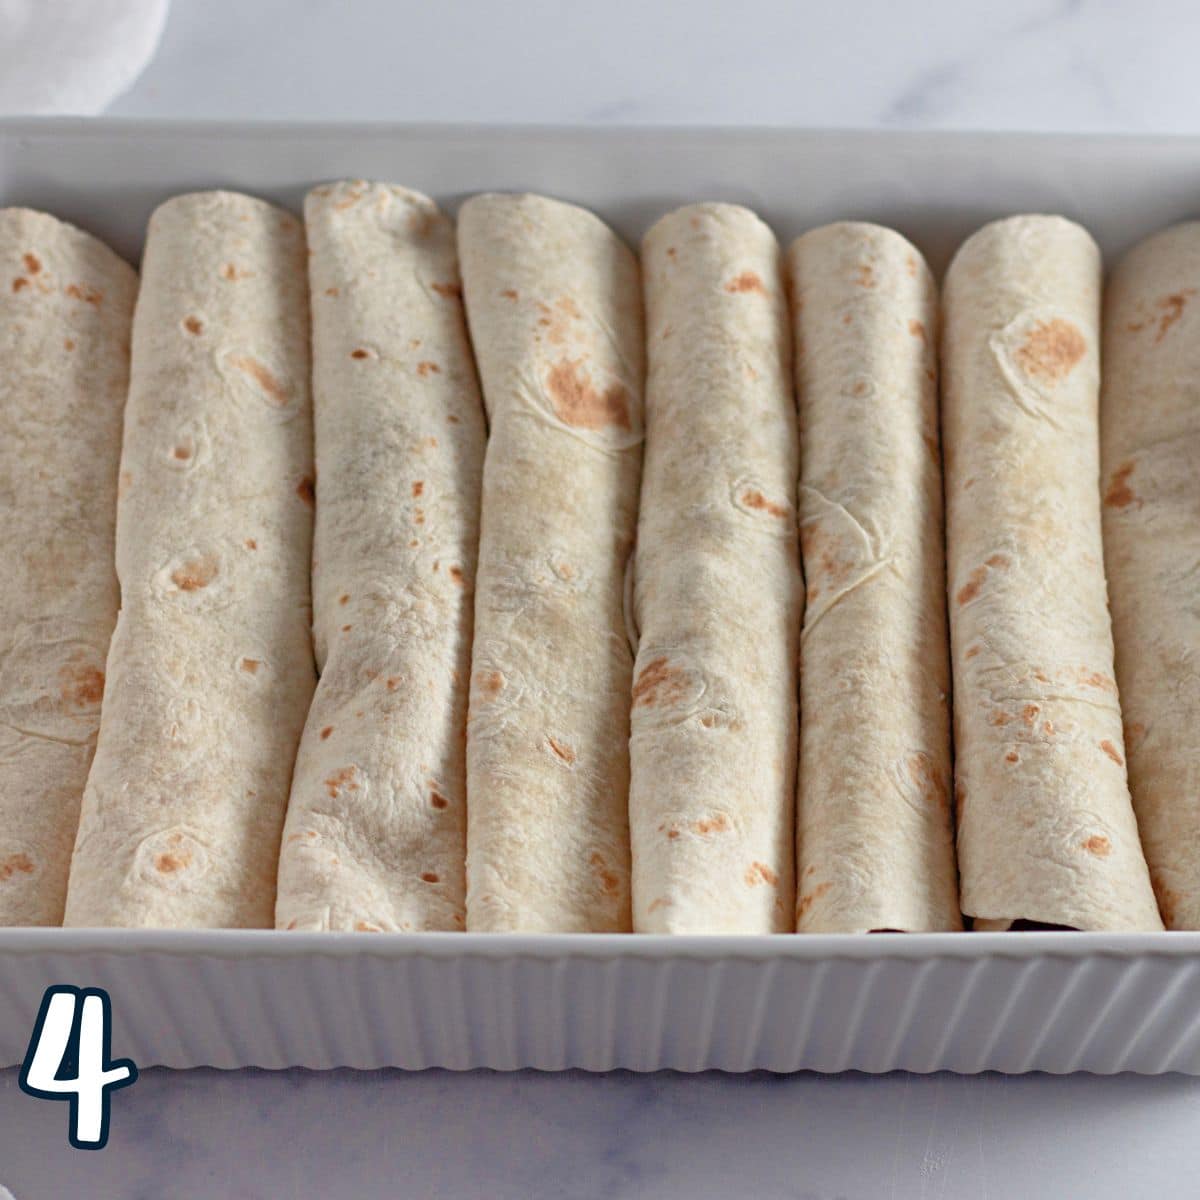 Flour tortillas filled with ground beef in a white baking dish.